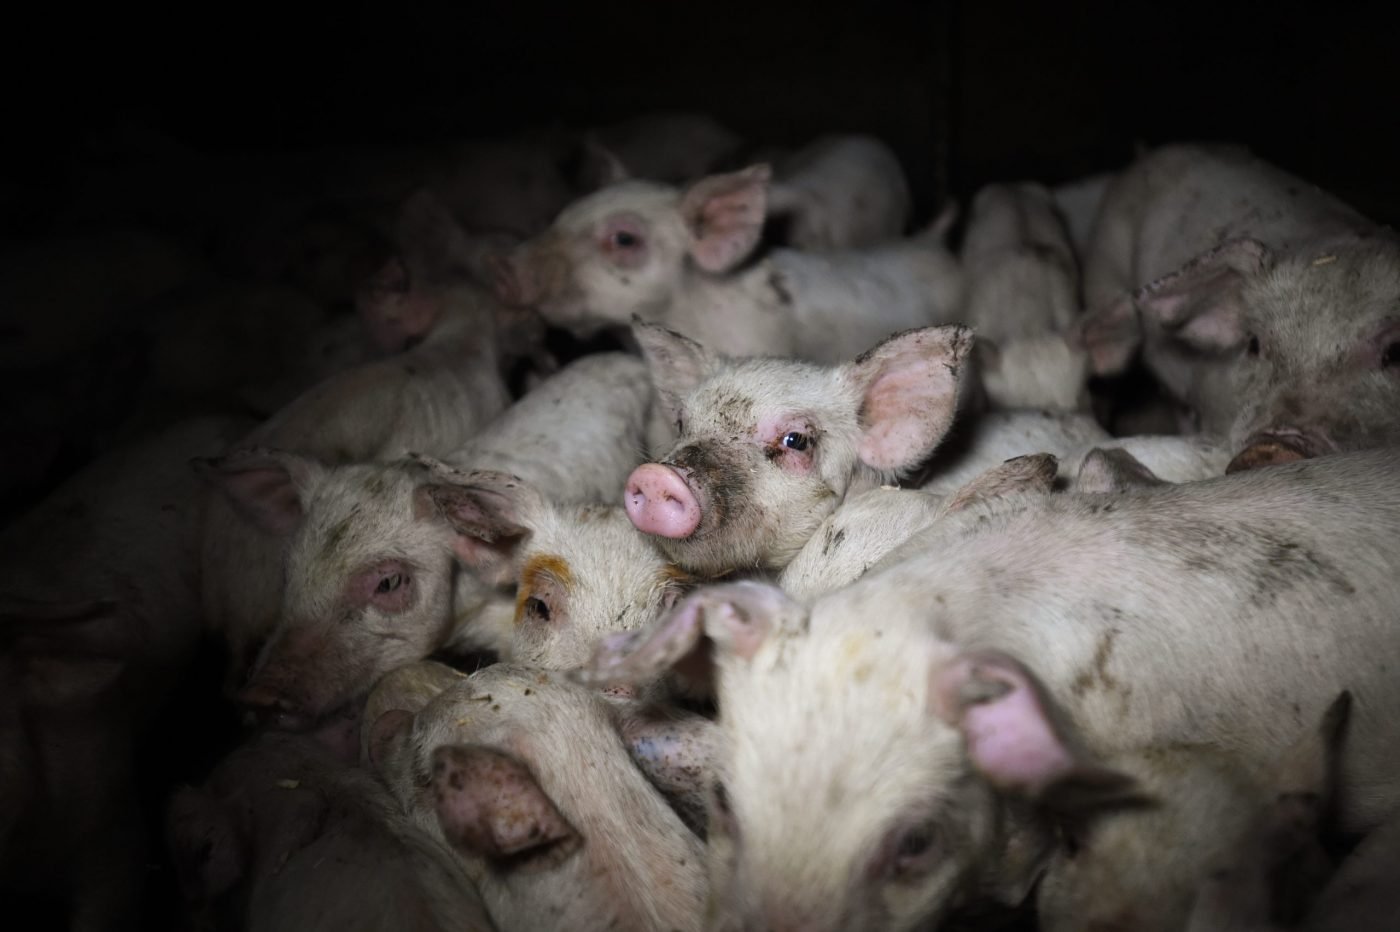 Piglets crowd one another in filth on a factory farm.